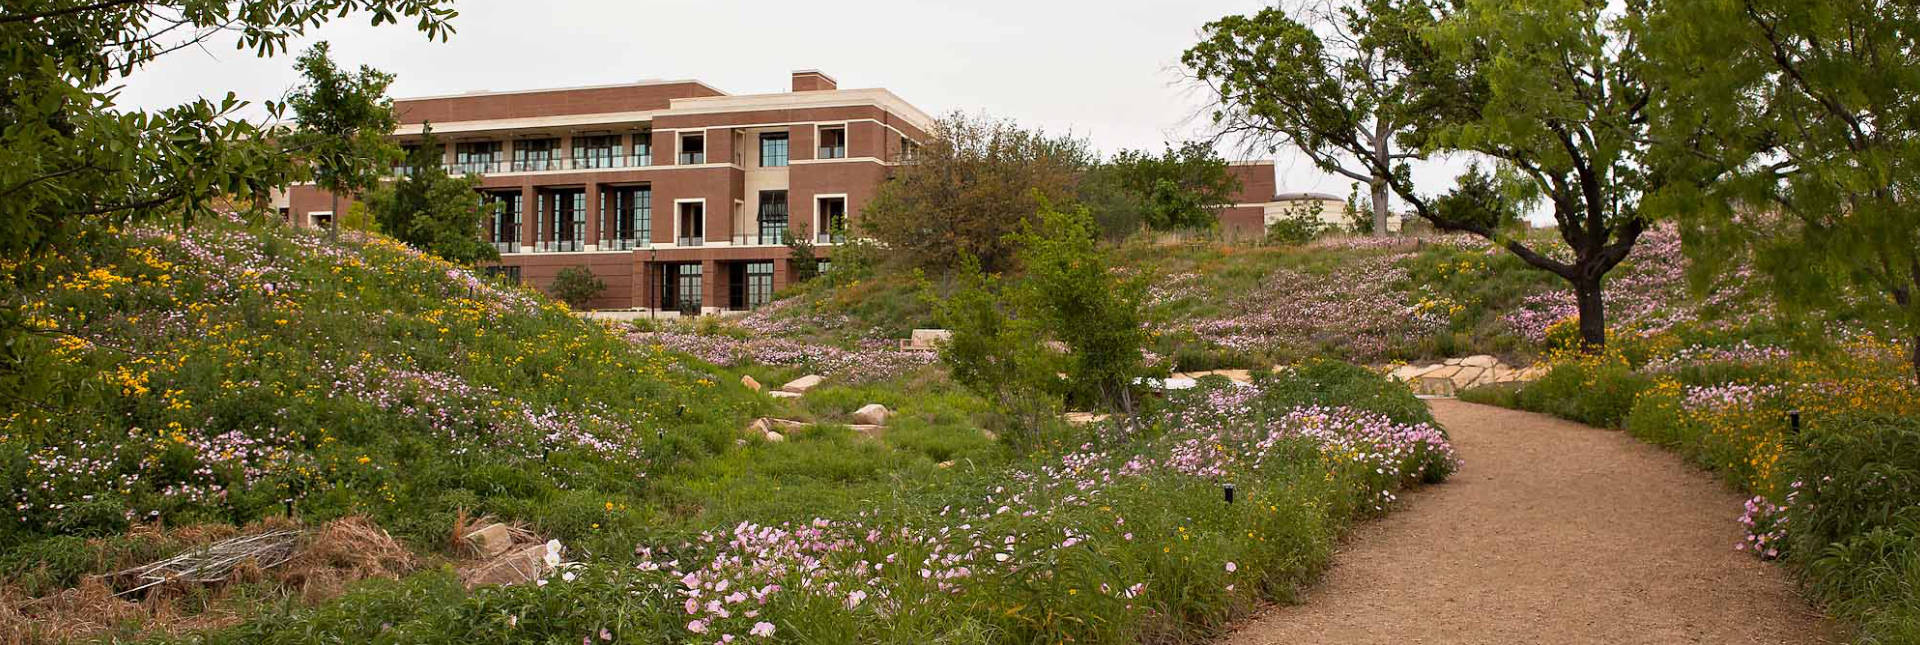 George W Bush Presidential Center | Dallas Commercial Landscaping Services